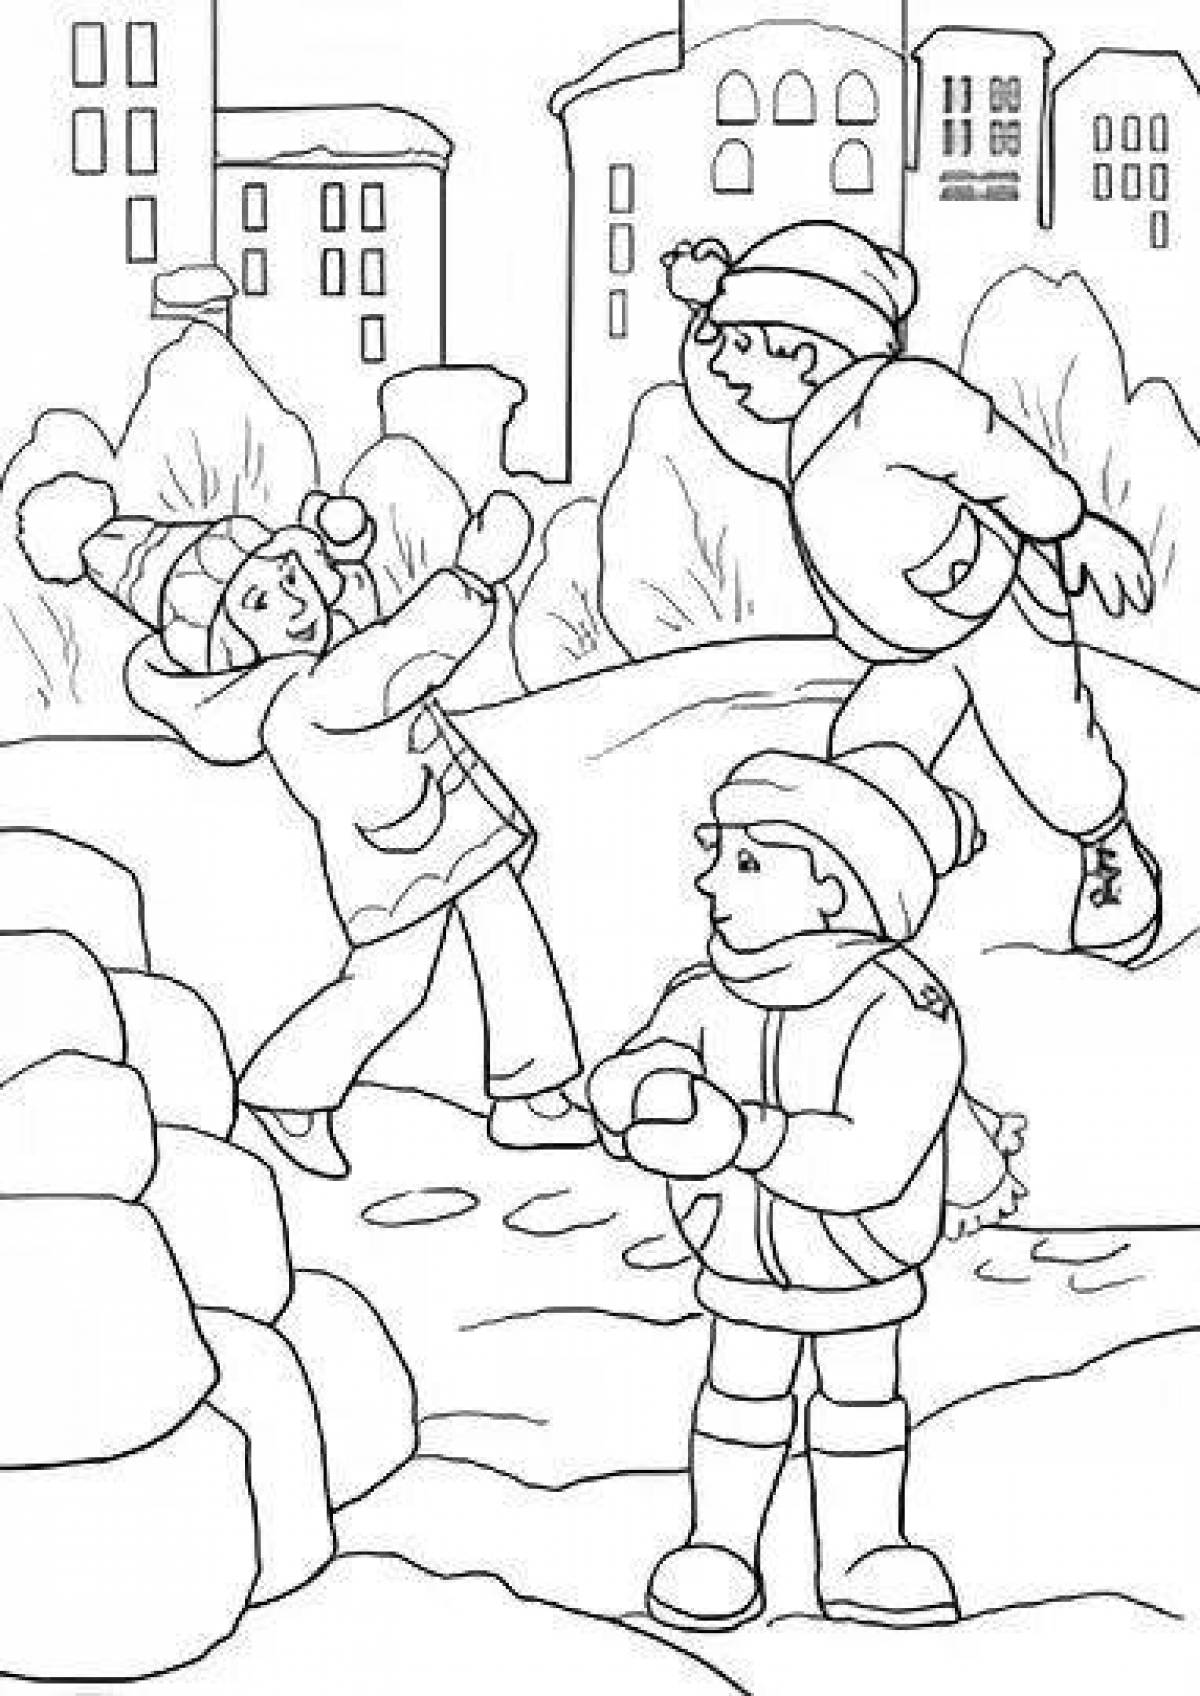 Charming children playing snowballs coloring book